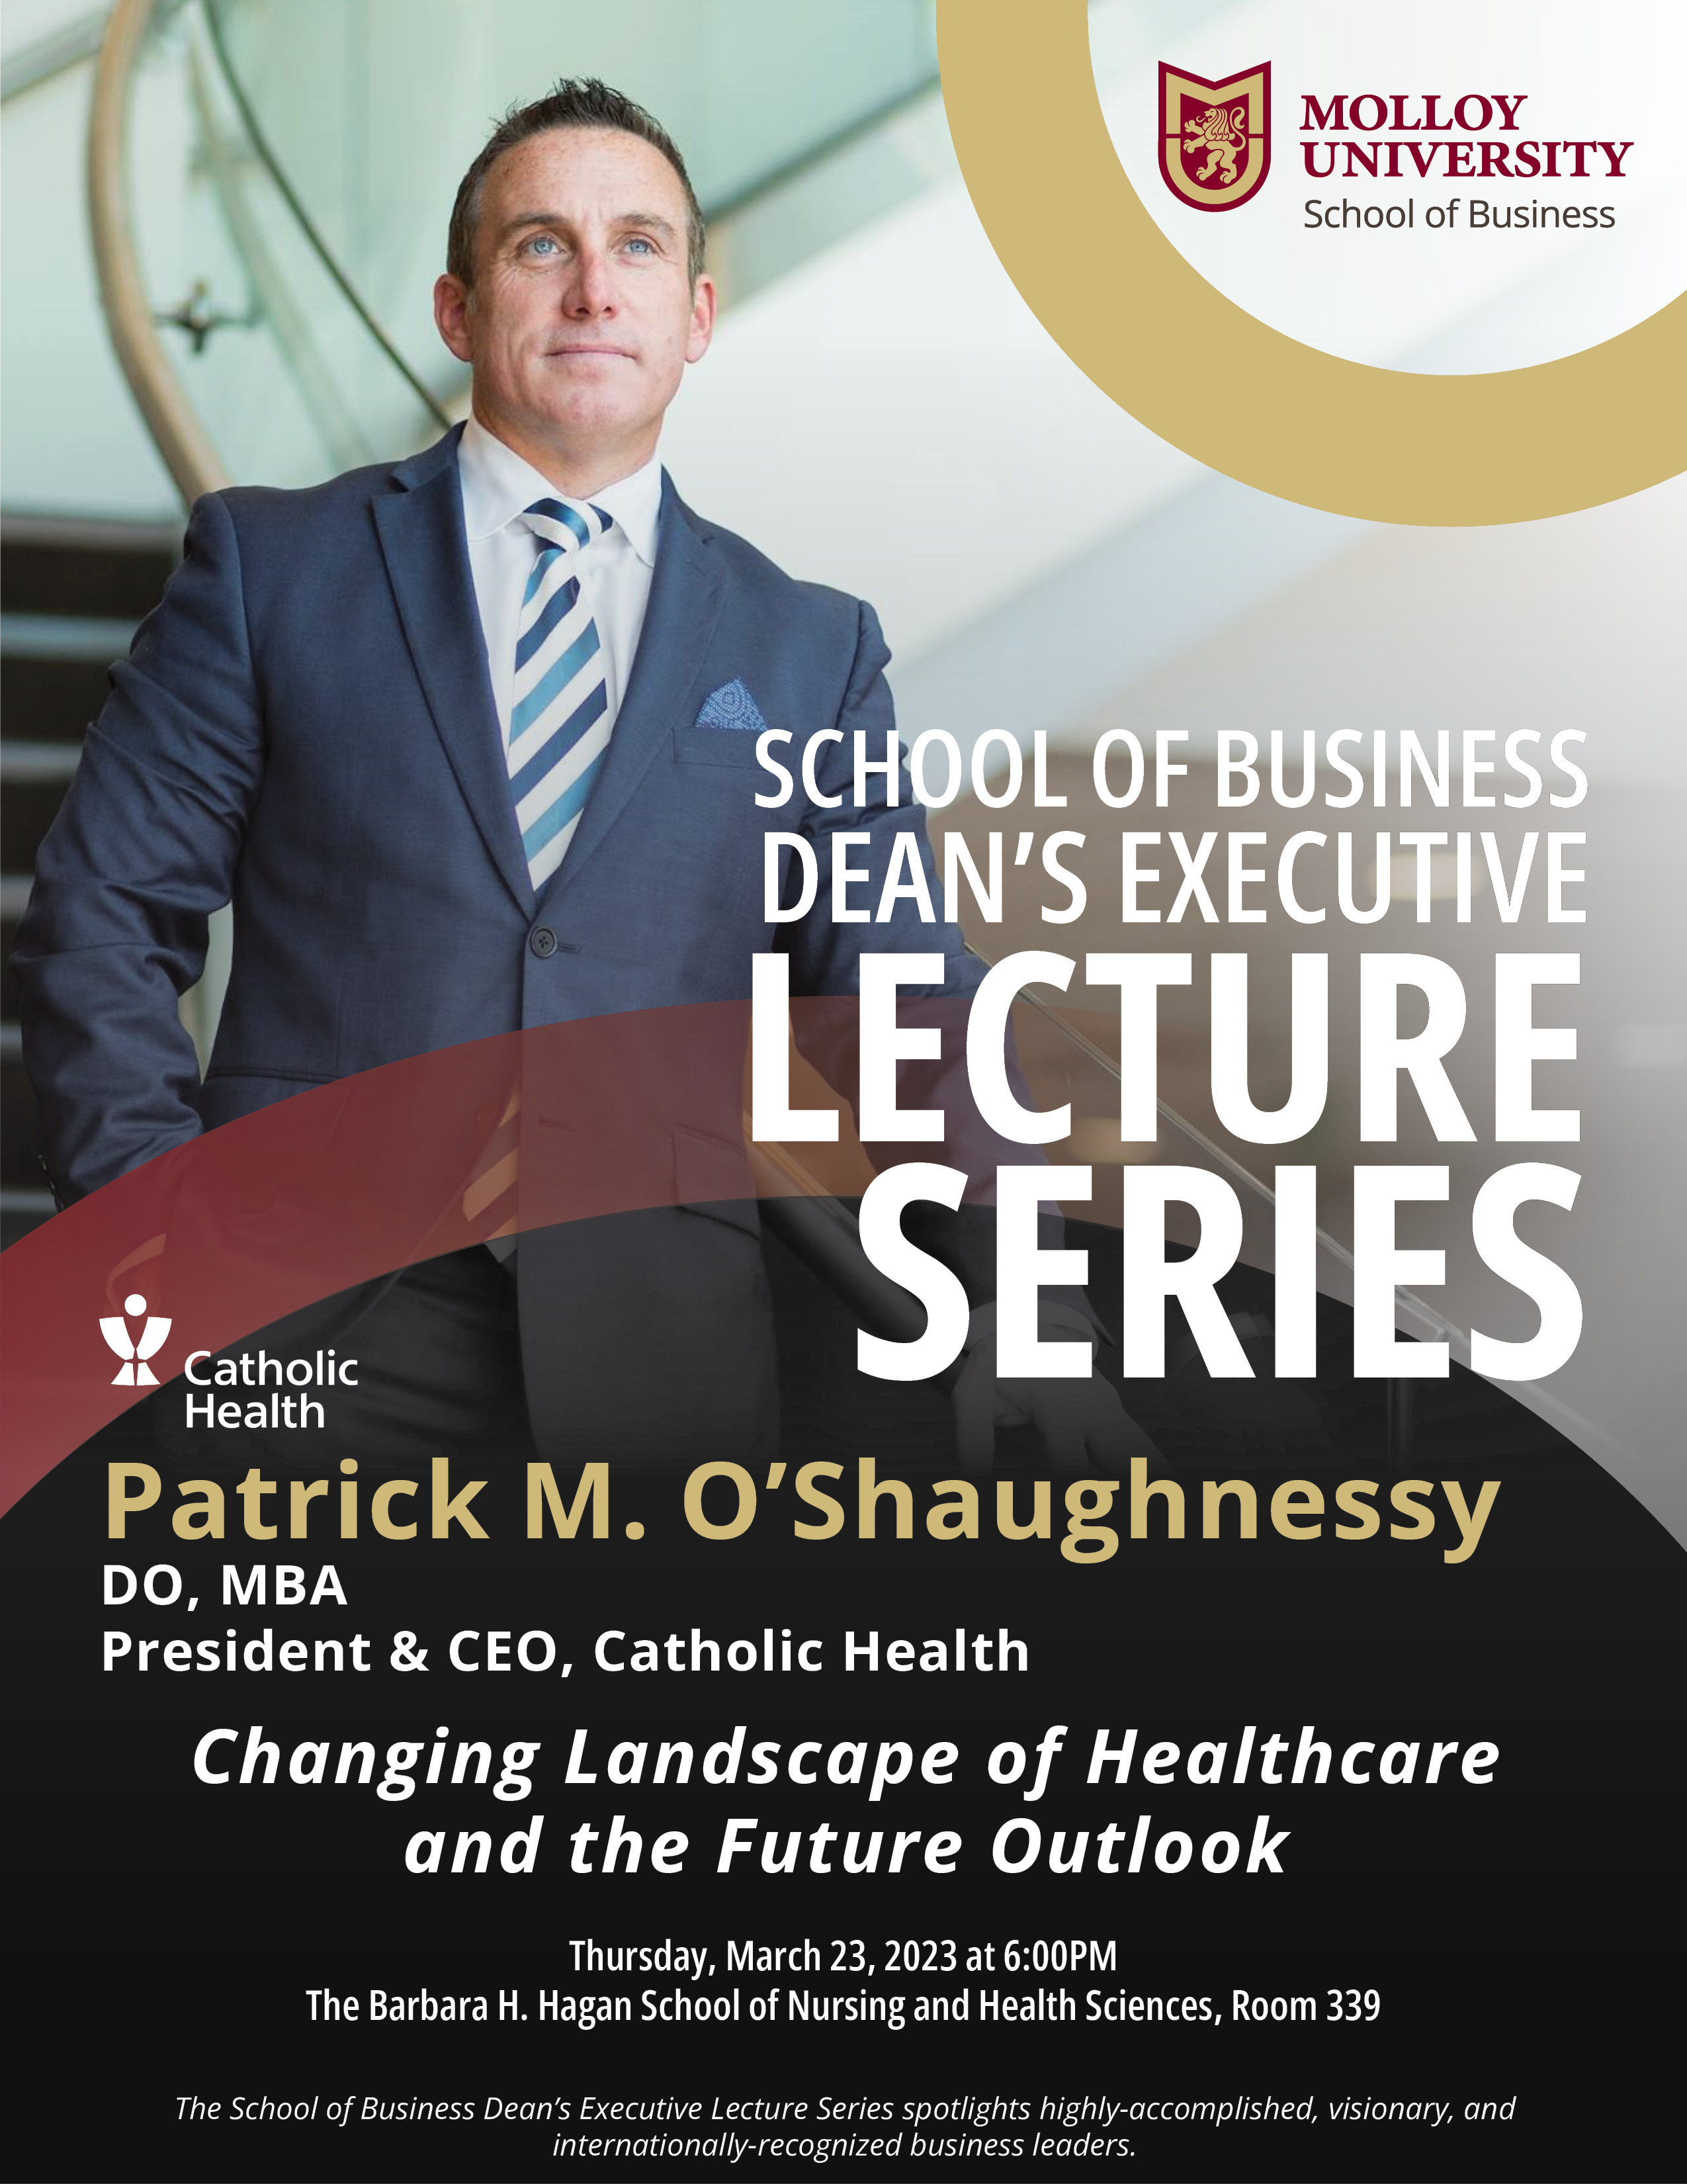 deans-executive-lecture-series-flyer-2022_final2.jpg